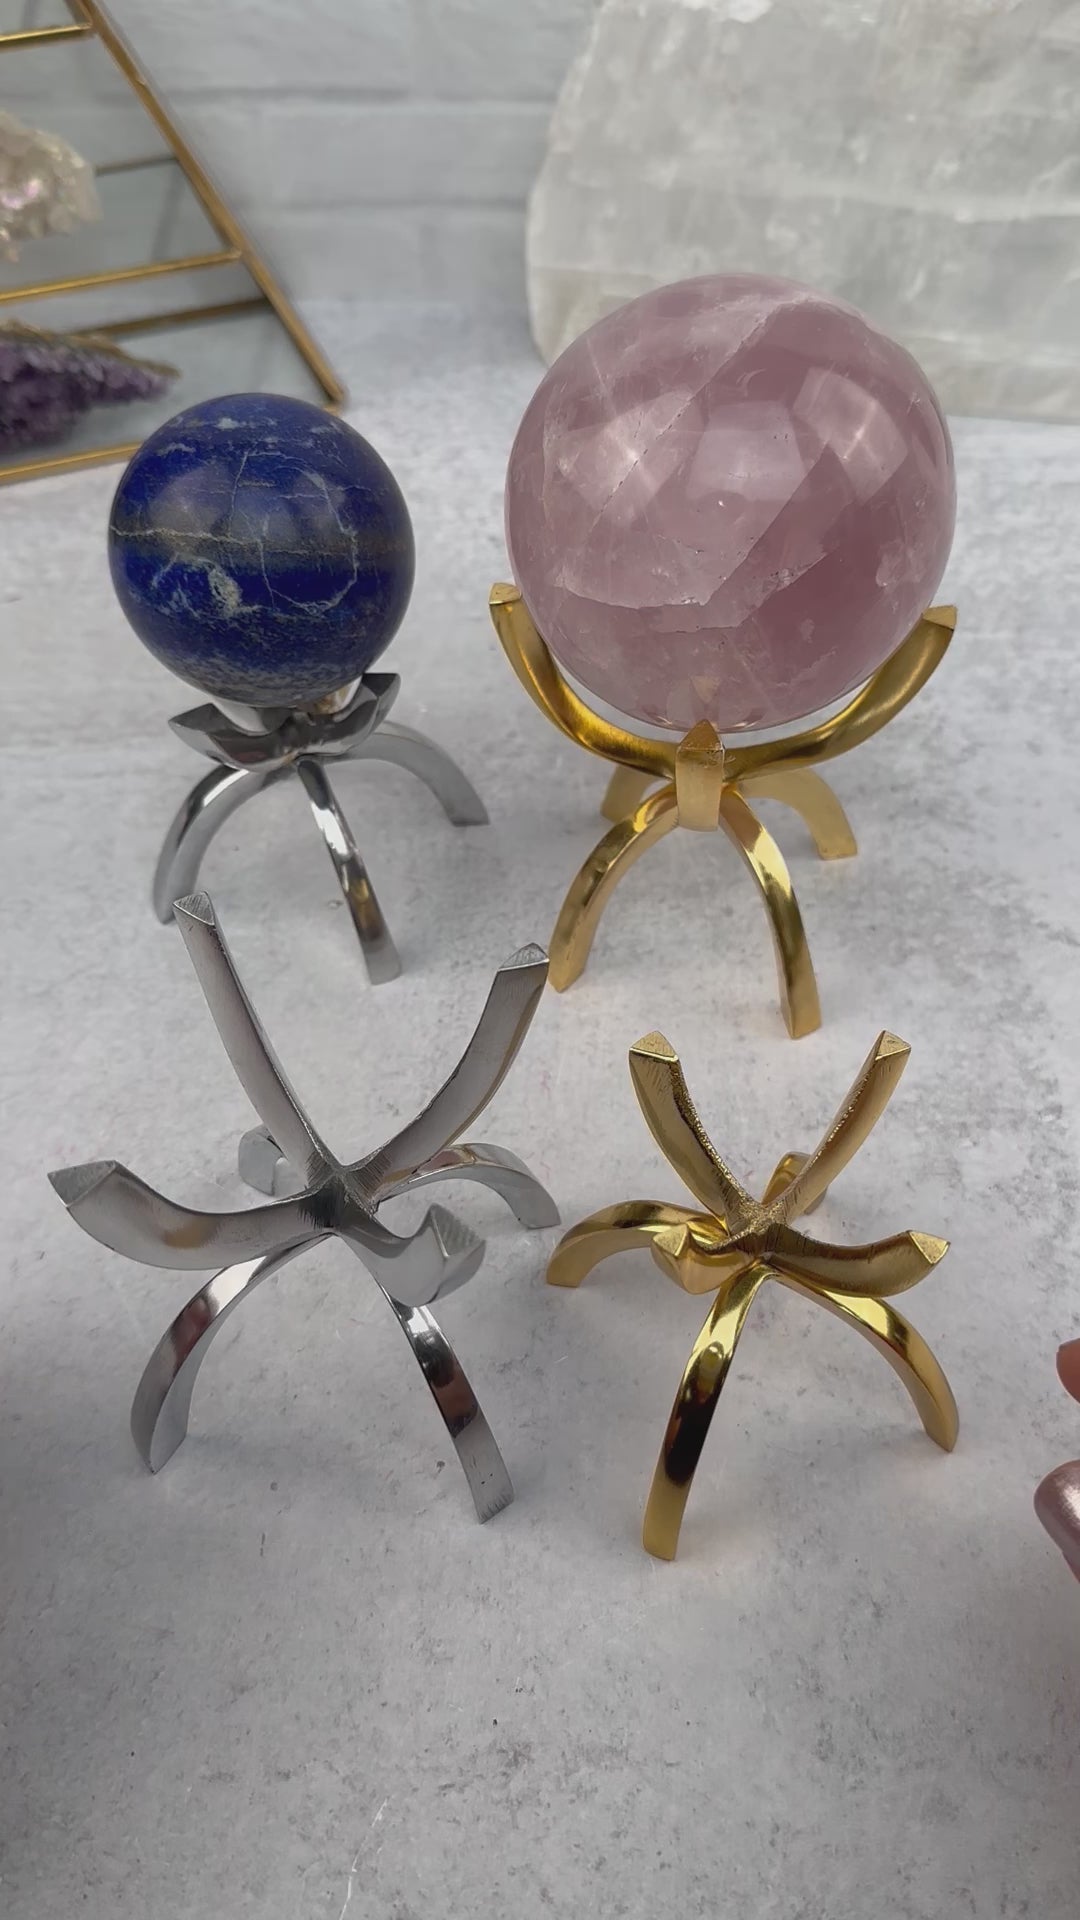 Metal Claw Stand - Sphere Holder - Holds other Crystals